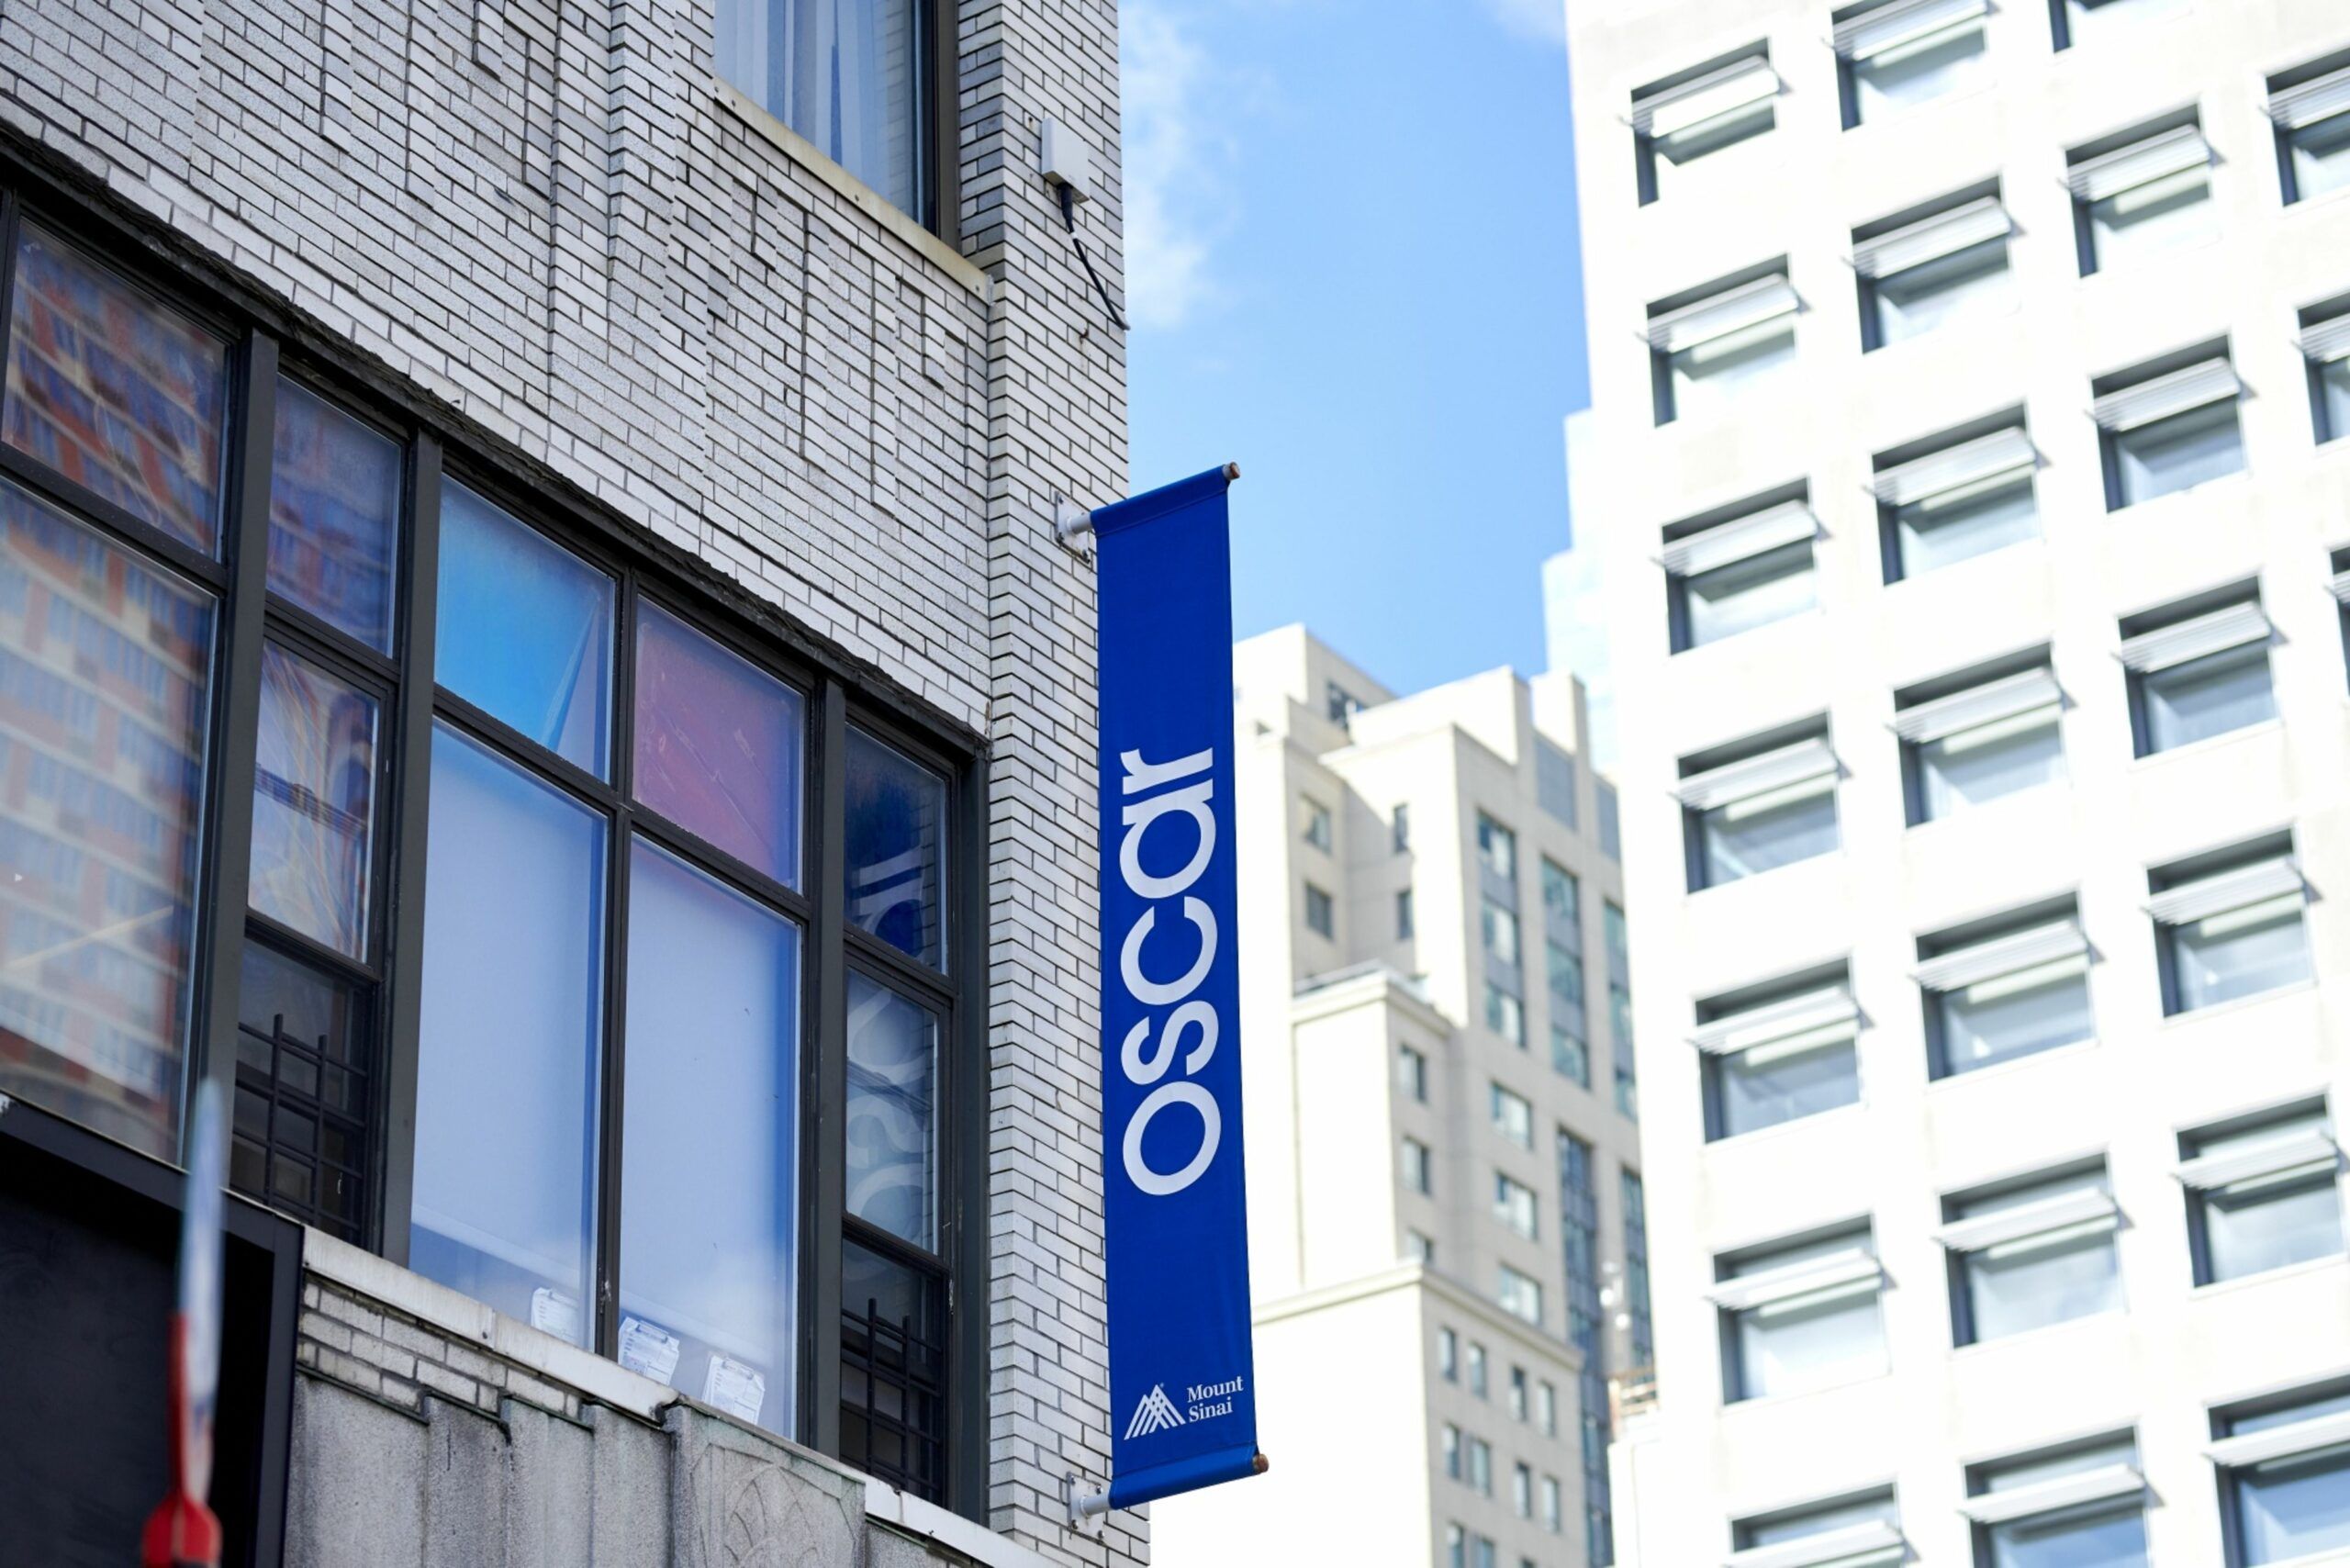 Signage outside the Oscar Health Center in the Brooklyn Borough of New York, U.S., on  Thursday, March 4, 2021. Oscar Health Inc. opened trading at $36 after its $1.44 billion IPO priced at $39 per share, above its $36 to $38 offering range. Photographer: Gabby Jones/Bloomberg